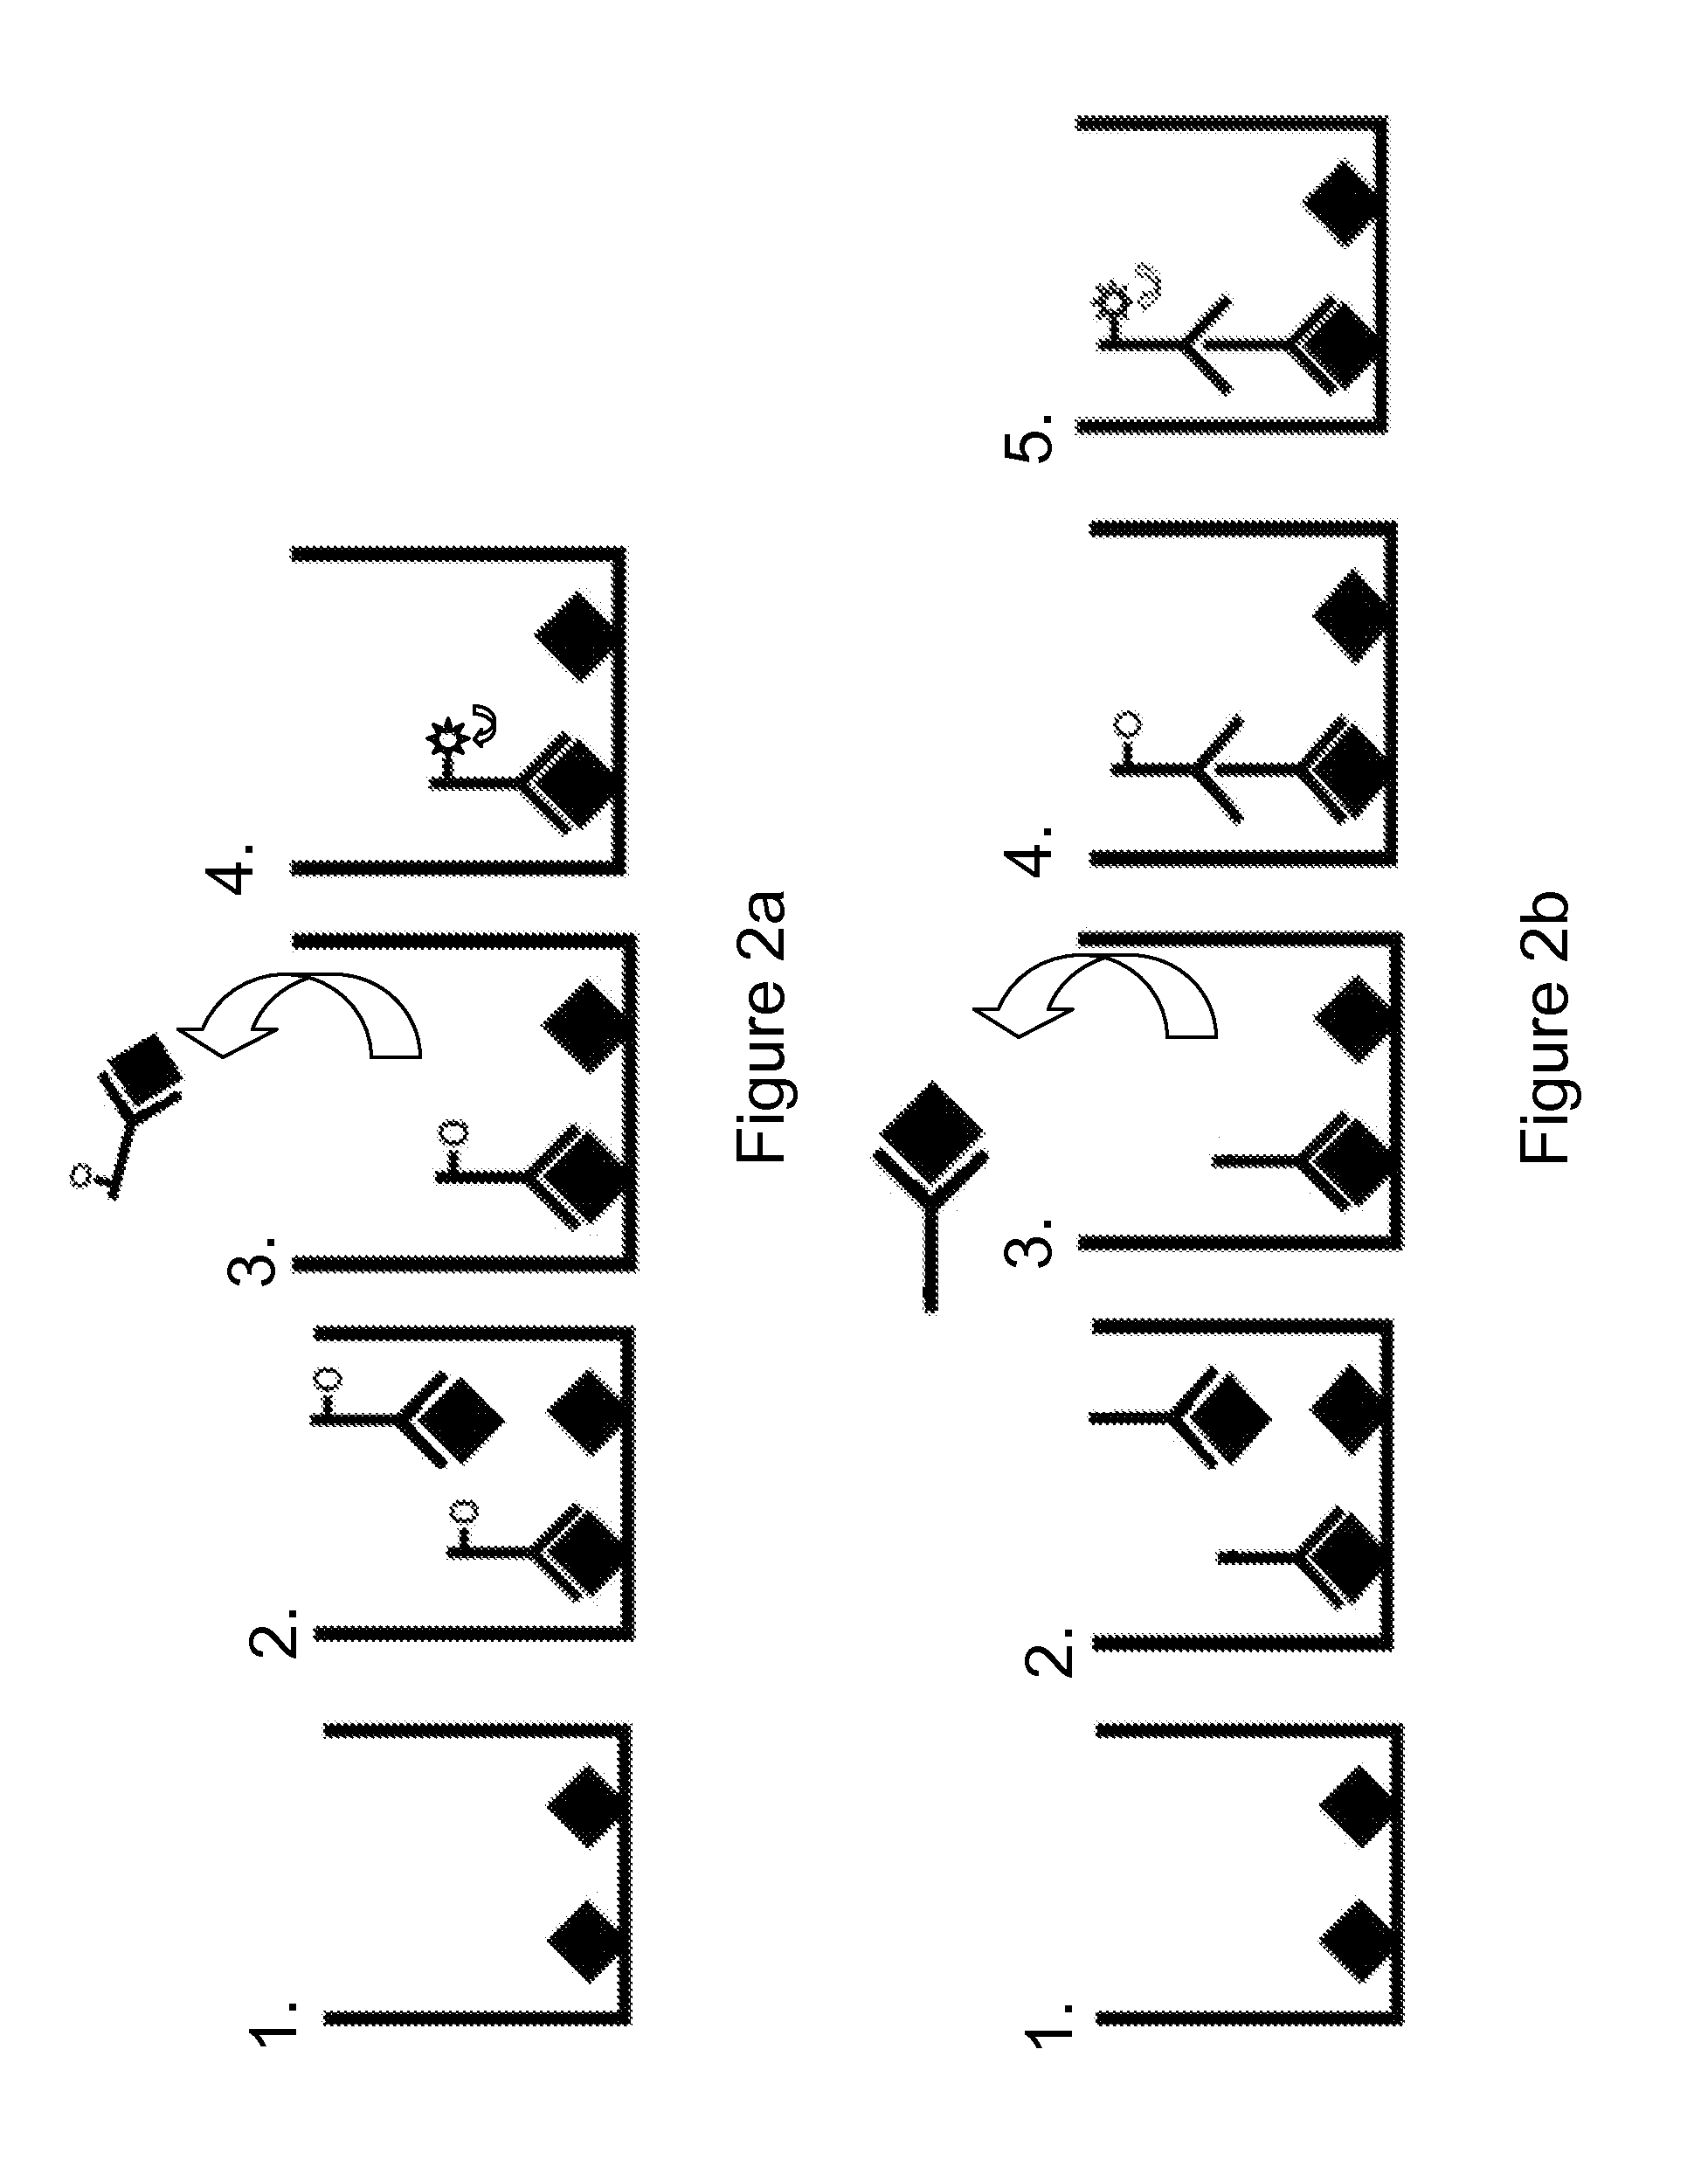 Compositions and methods for the rapid growth and detection of microorganisms